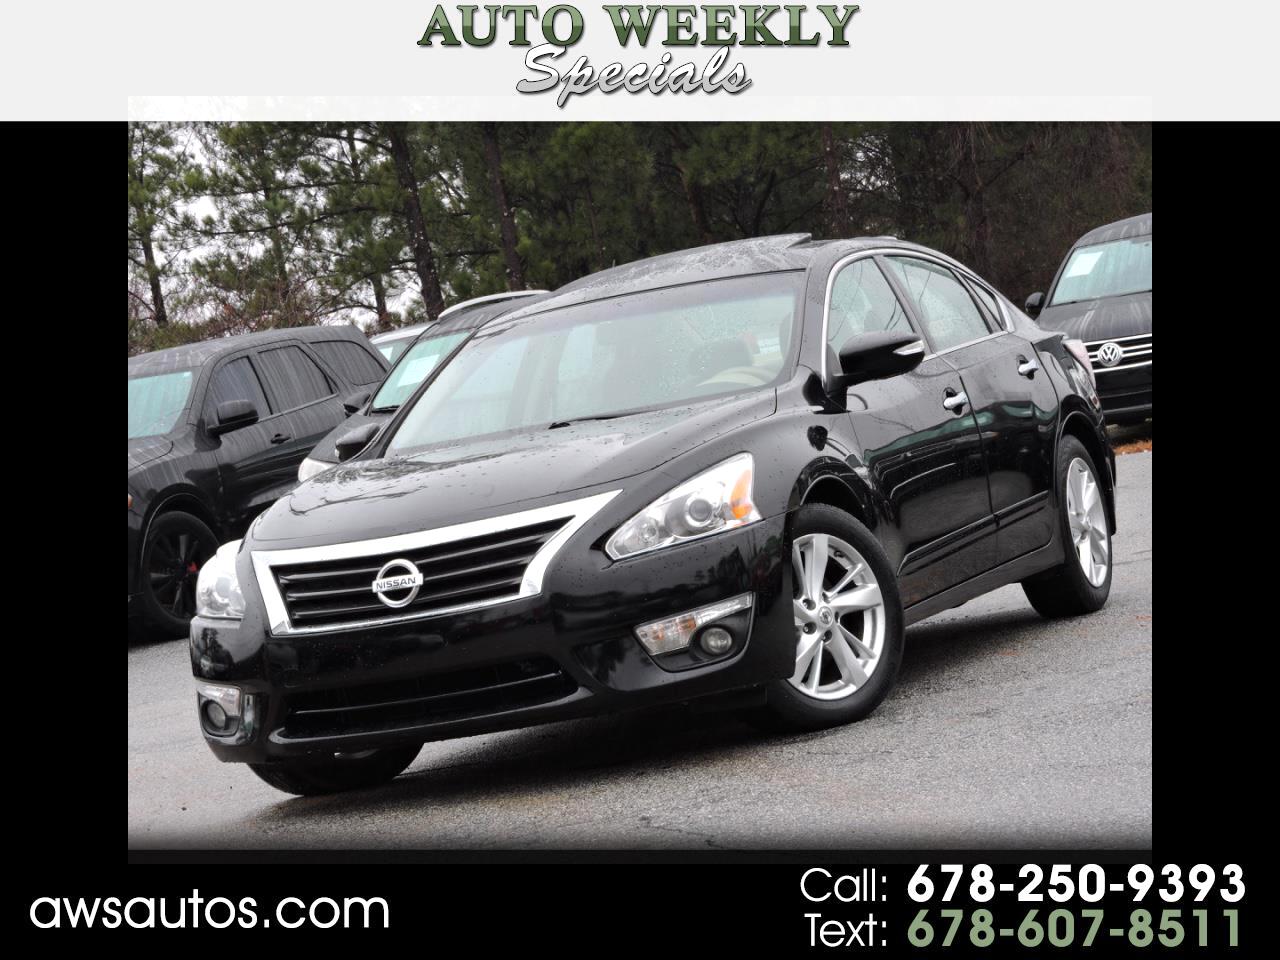 Used Cars For Sale Marietta Ga 30062 Auto Weekly Specials